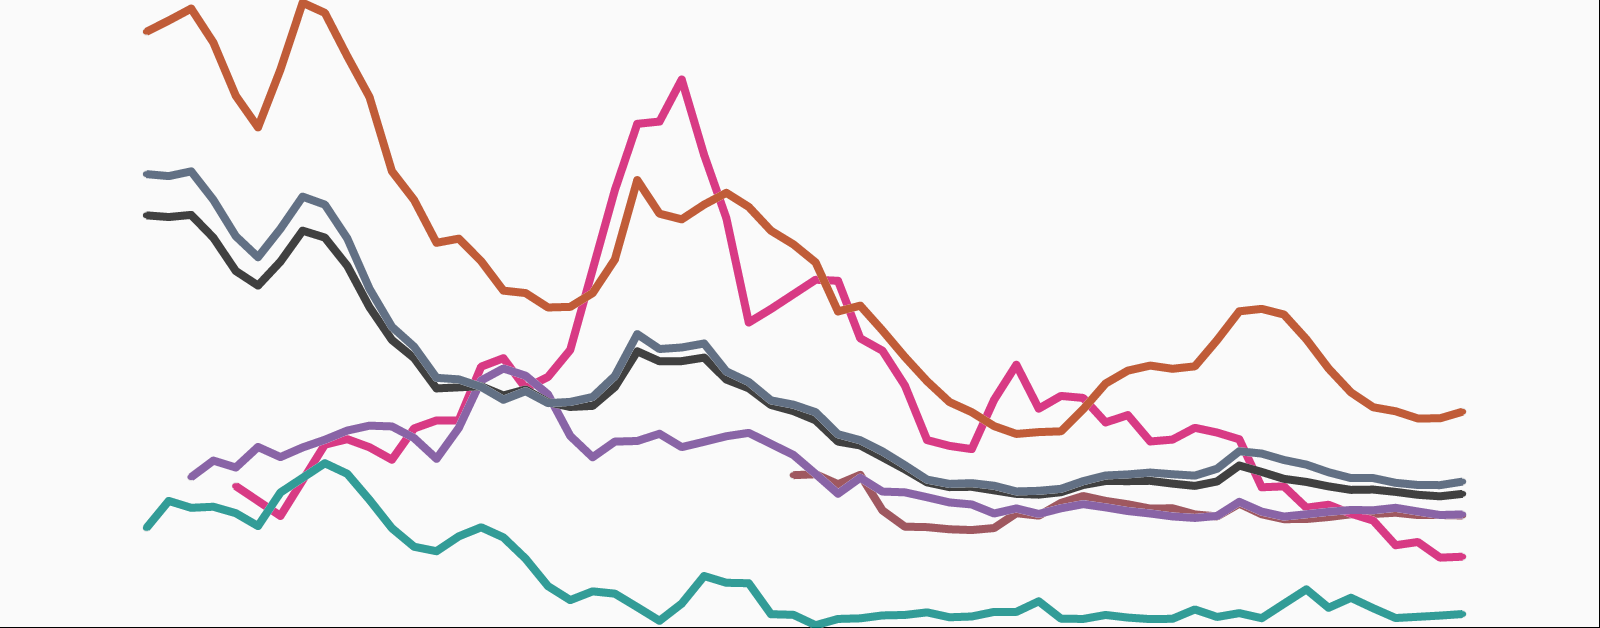 Featured image for topic page on Military Personnel and Spending. Stylized line chart with lines in different colors broadly going down, but some also up.